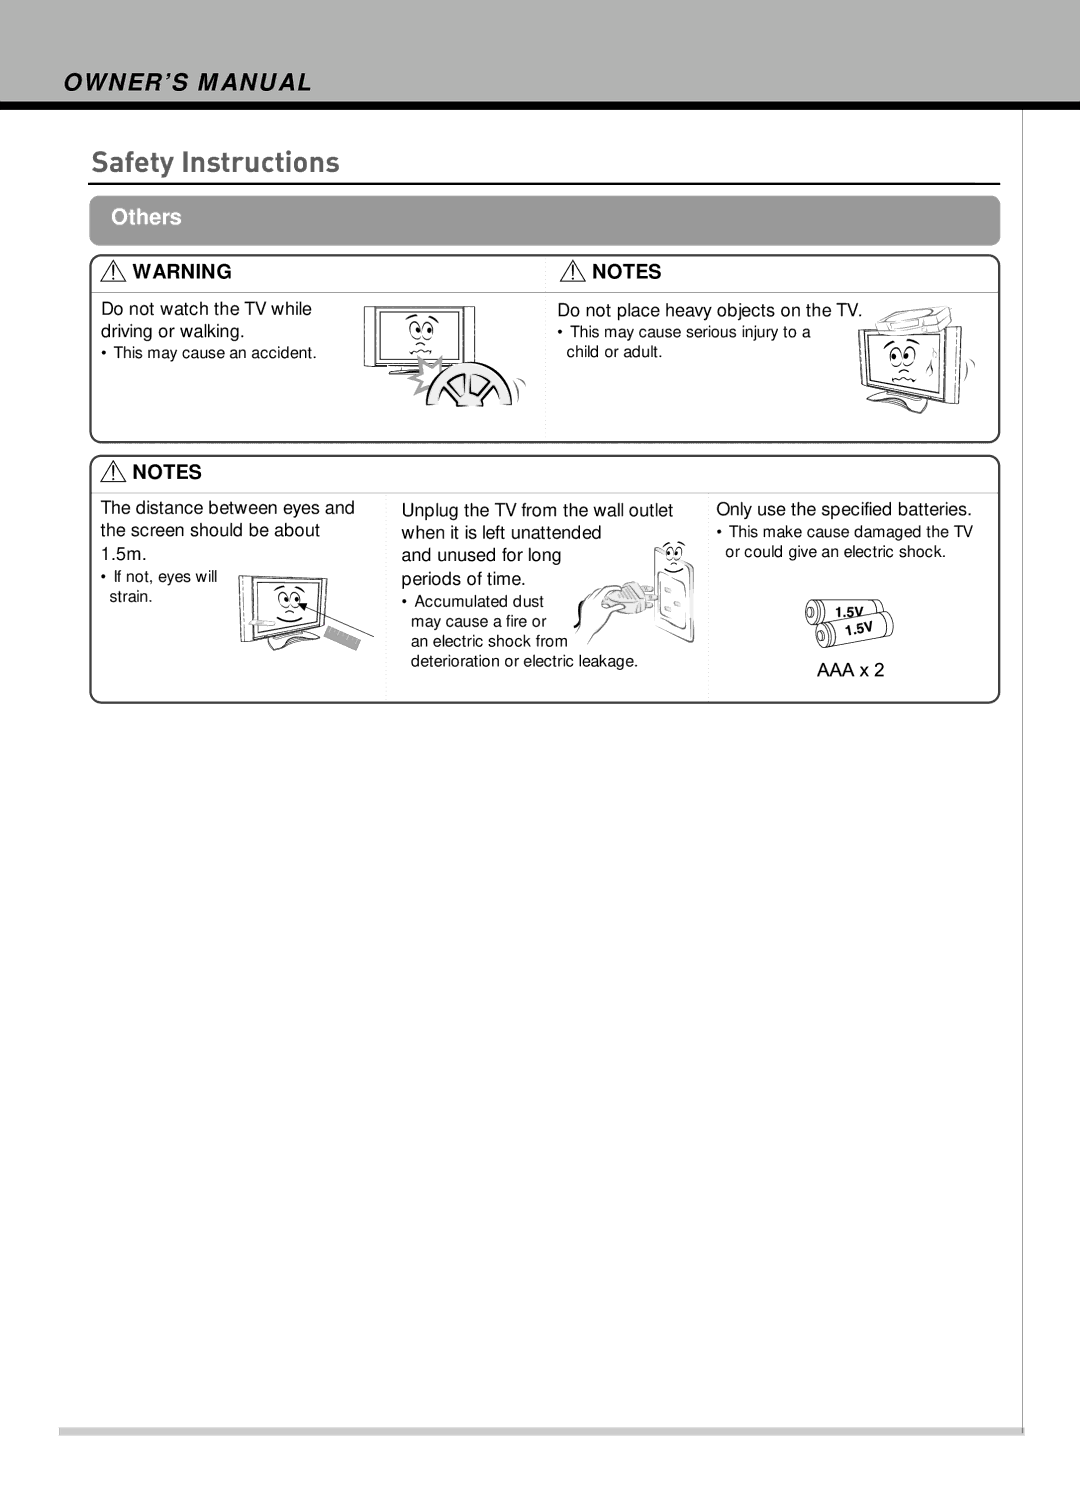 Hyundai IT HLT-2672 owner manual Do not watch the TV while driving or walking, Do not place heavy objects on the TV 